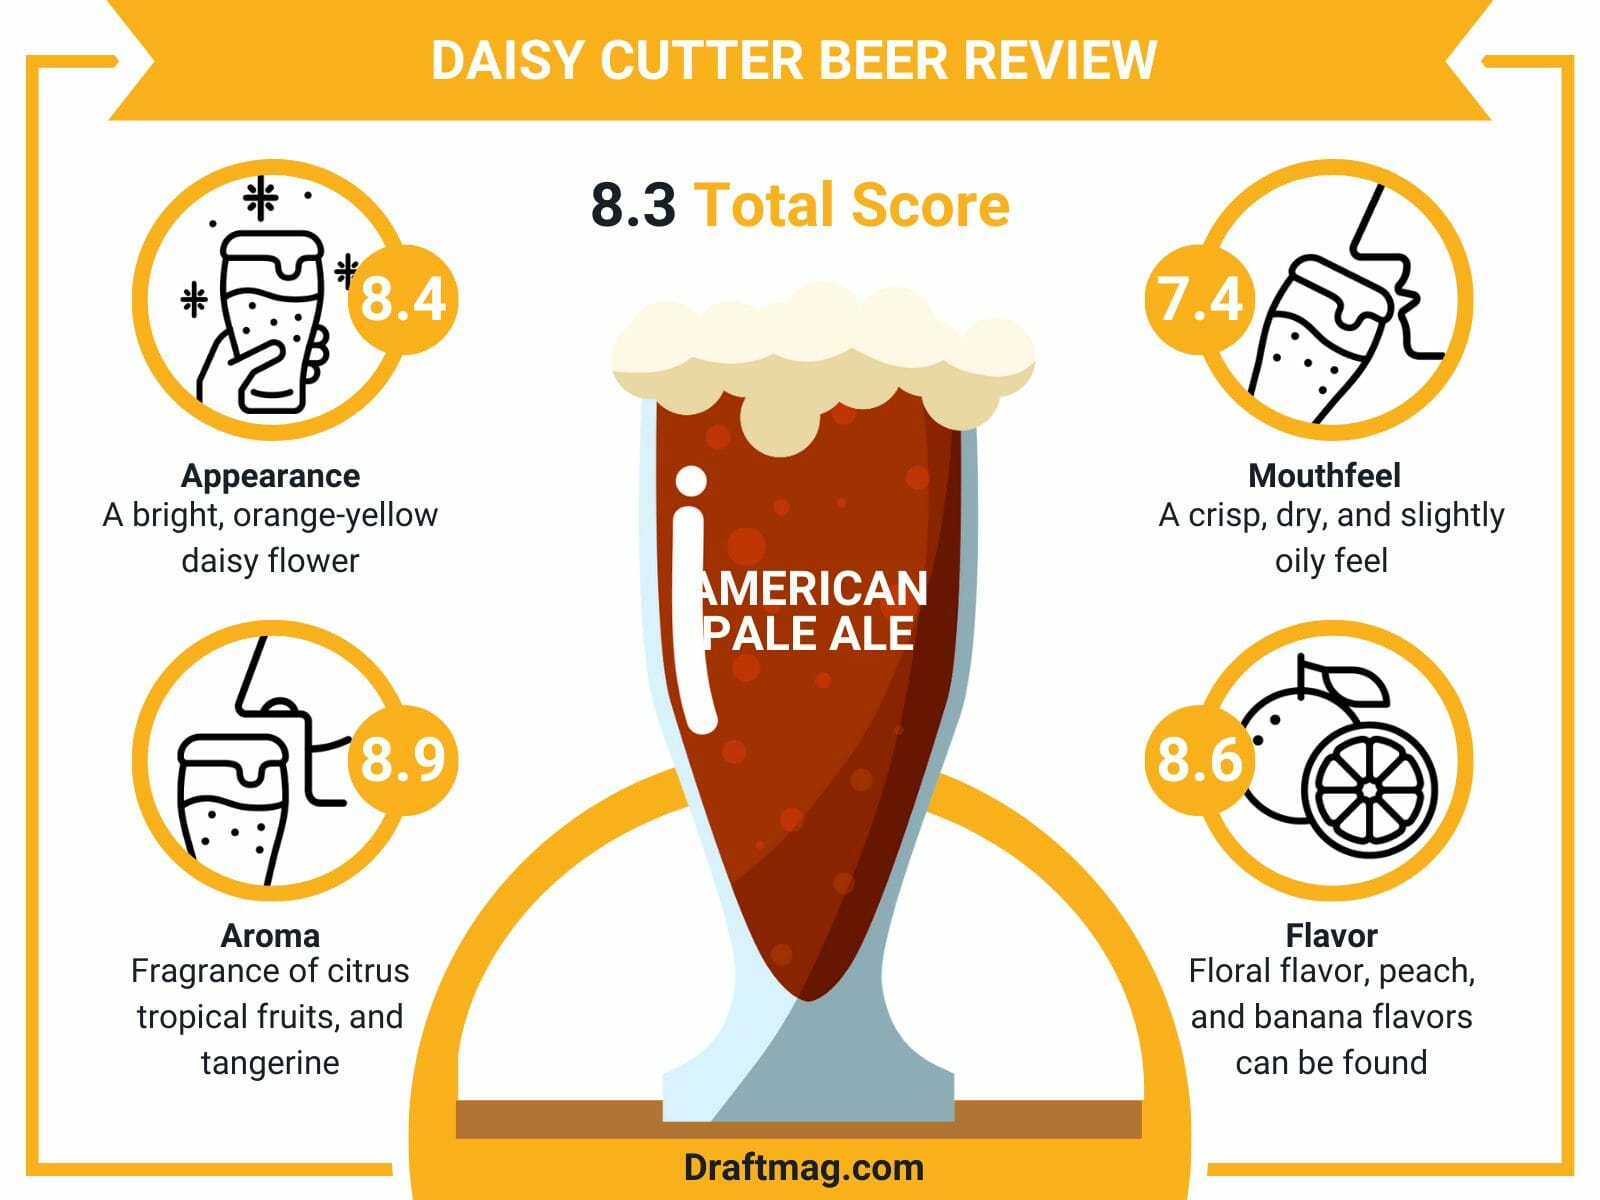 Daisy cutter beer review infographic